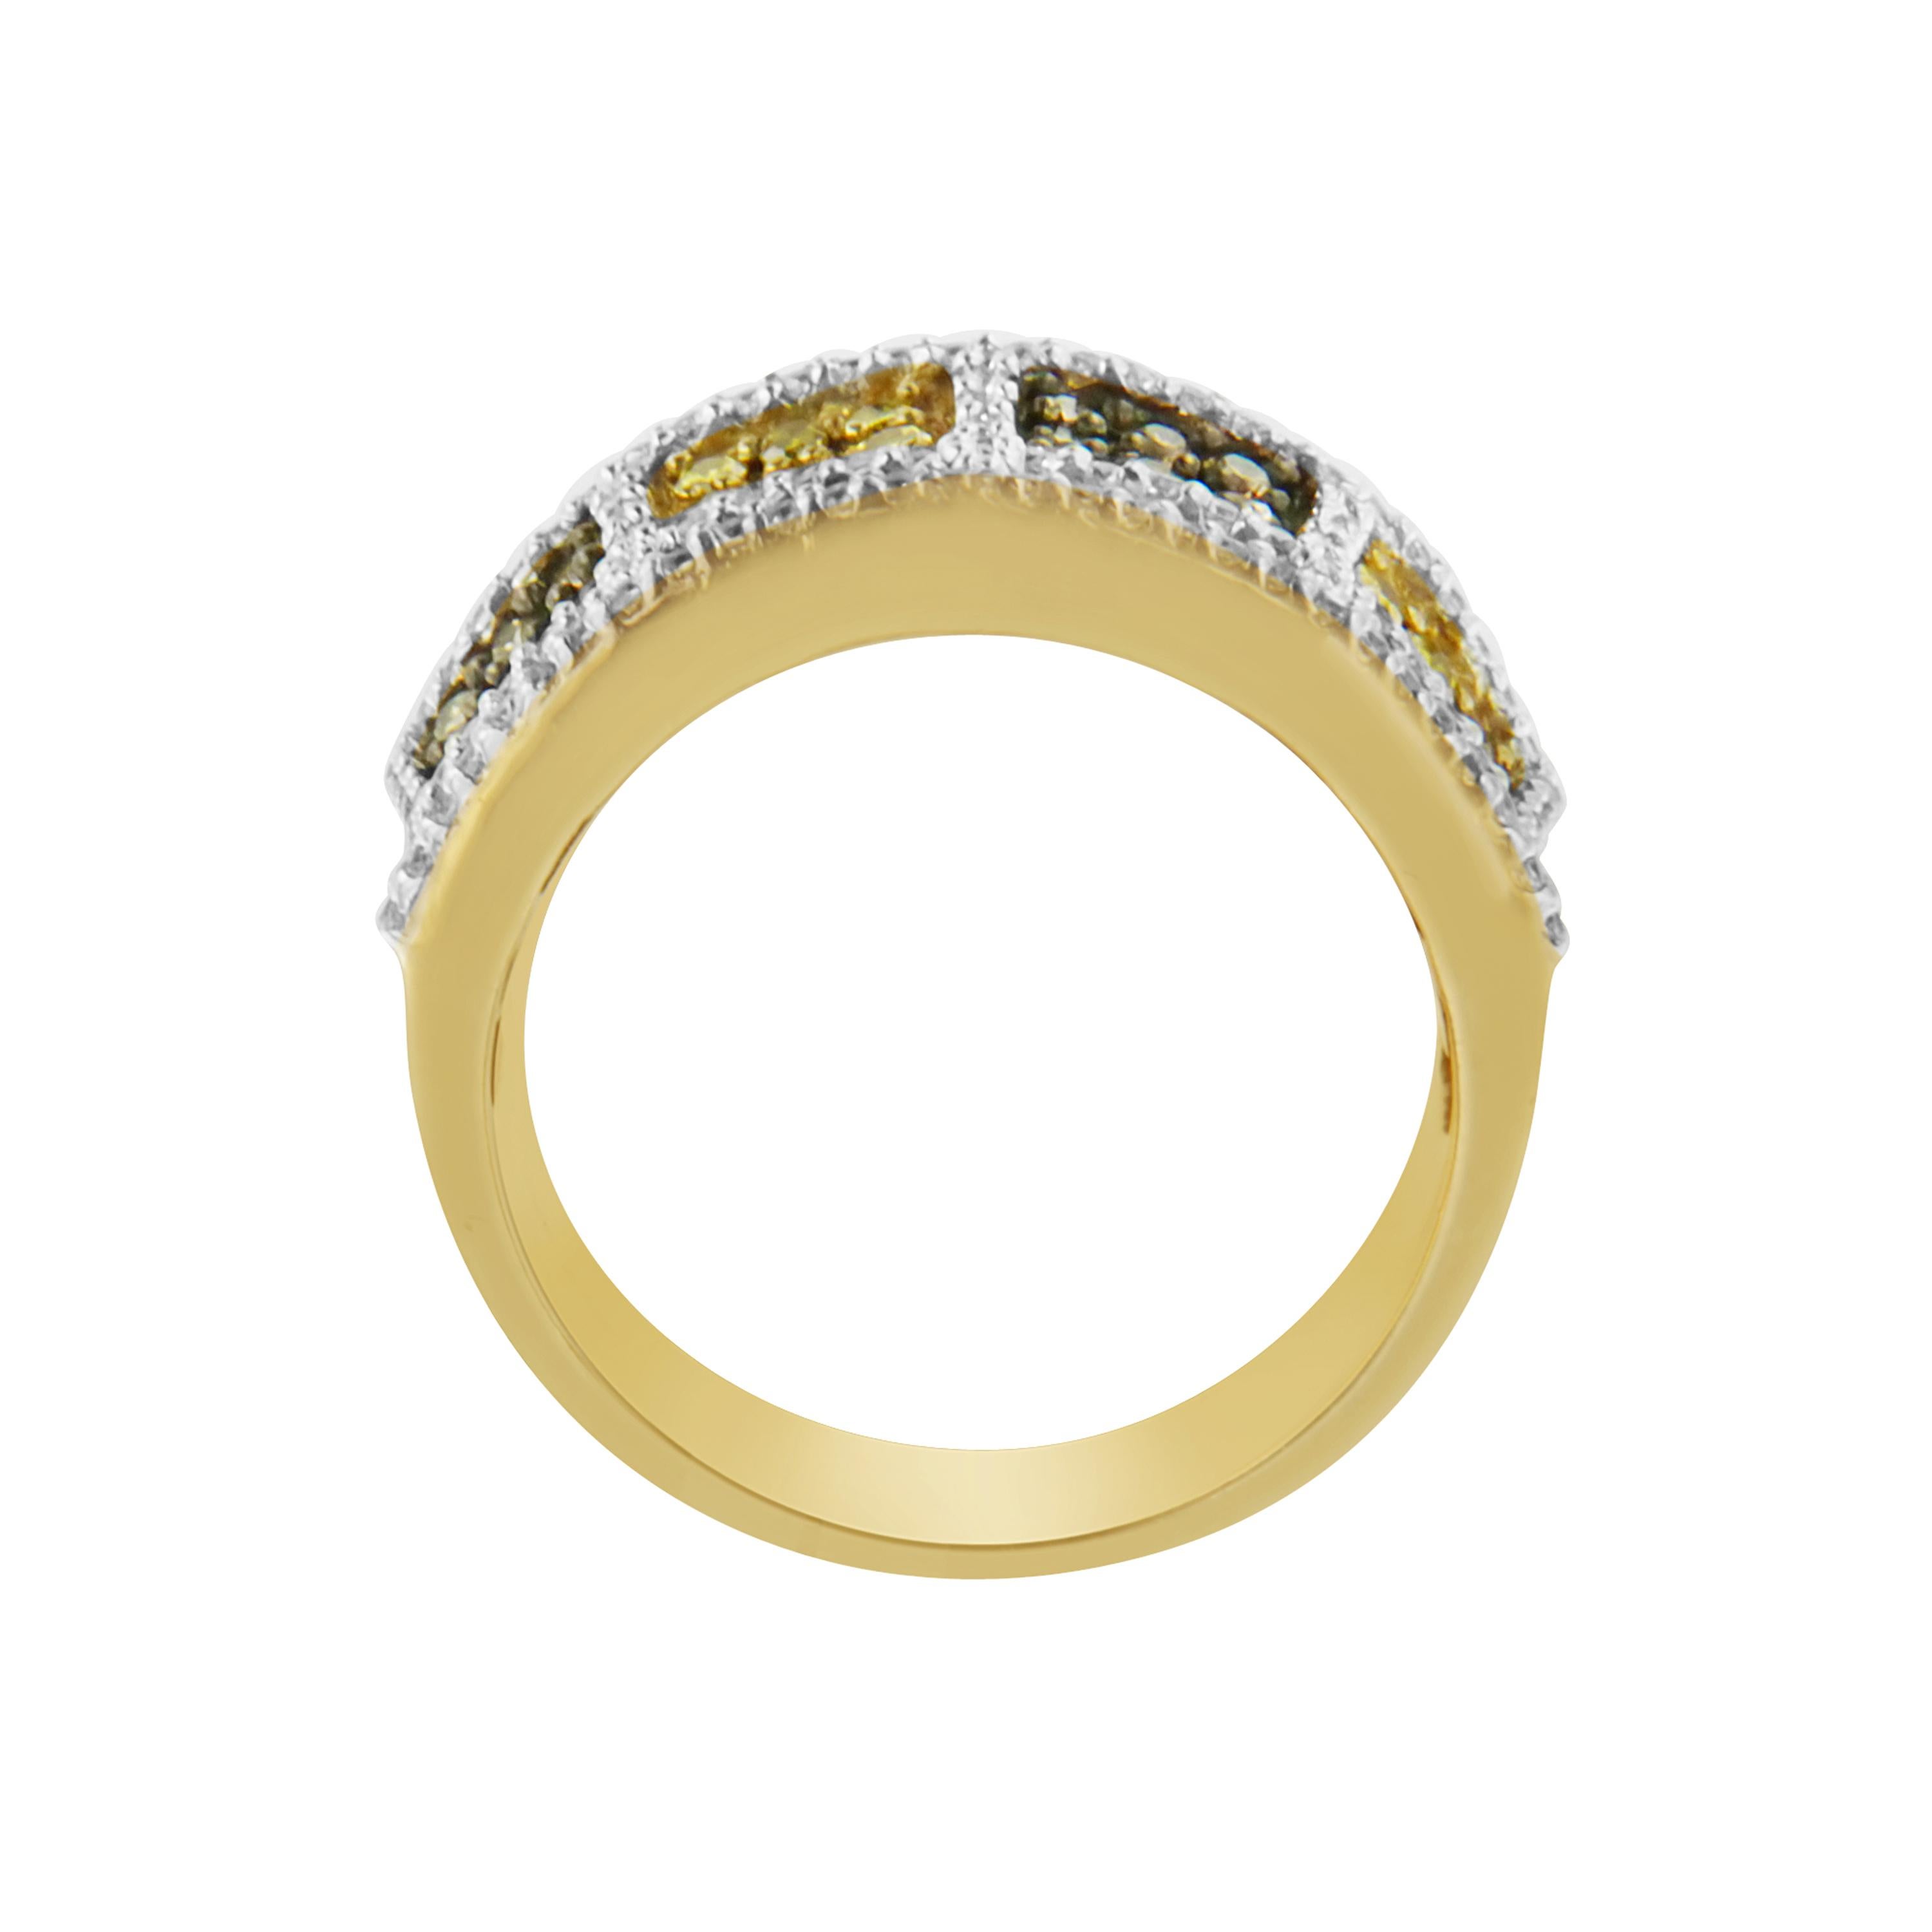 Upgrade your old and vintage collection of accessories by purchasing this outstanding diamond band. Crafted of cool 14k yellow gold, this fashion band showcase the champagne and round-cut diamonds finely framed in the prong setting. It's unique and